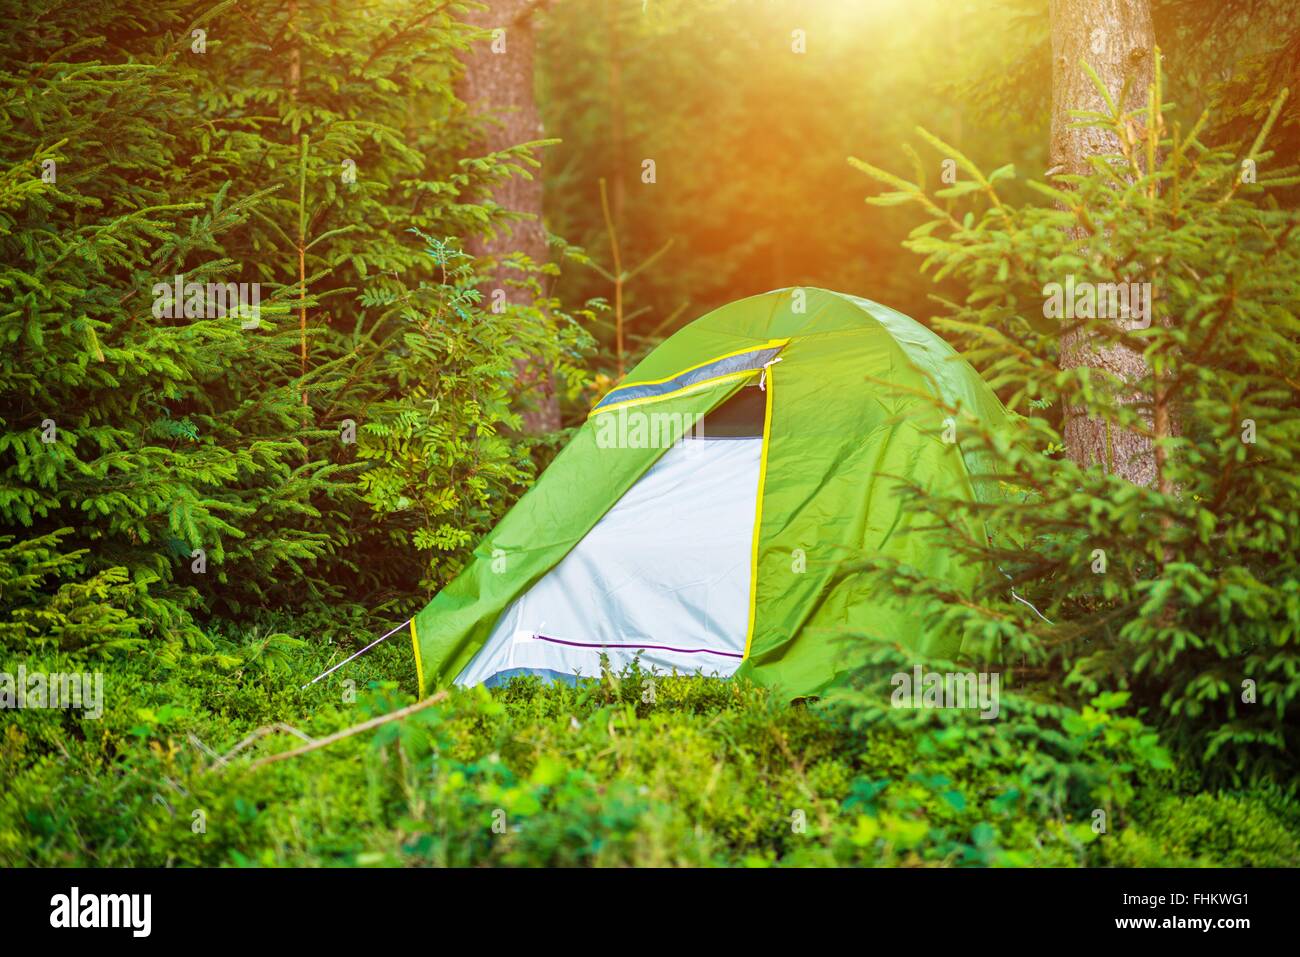 Wild Summer Camping in the Middle of Nowhere. Camping and Recreation Theme. Stock Photo